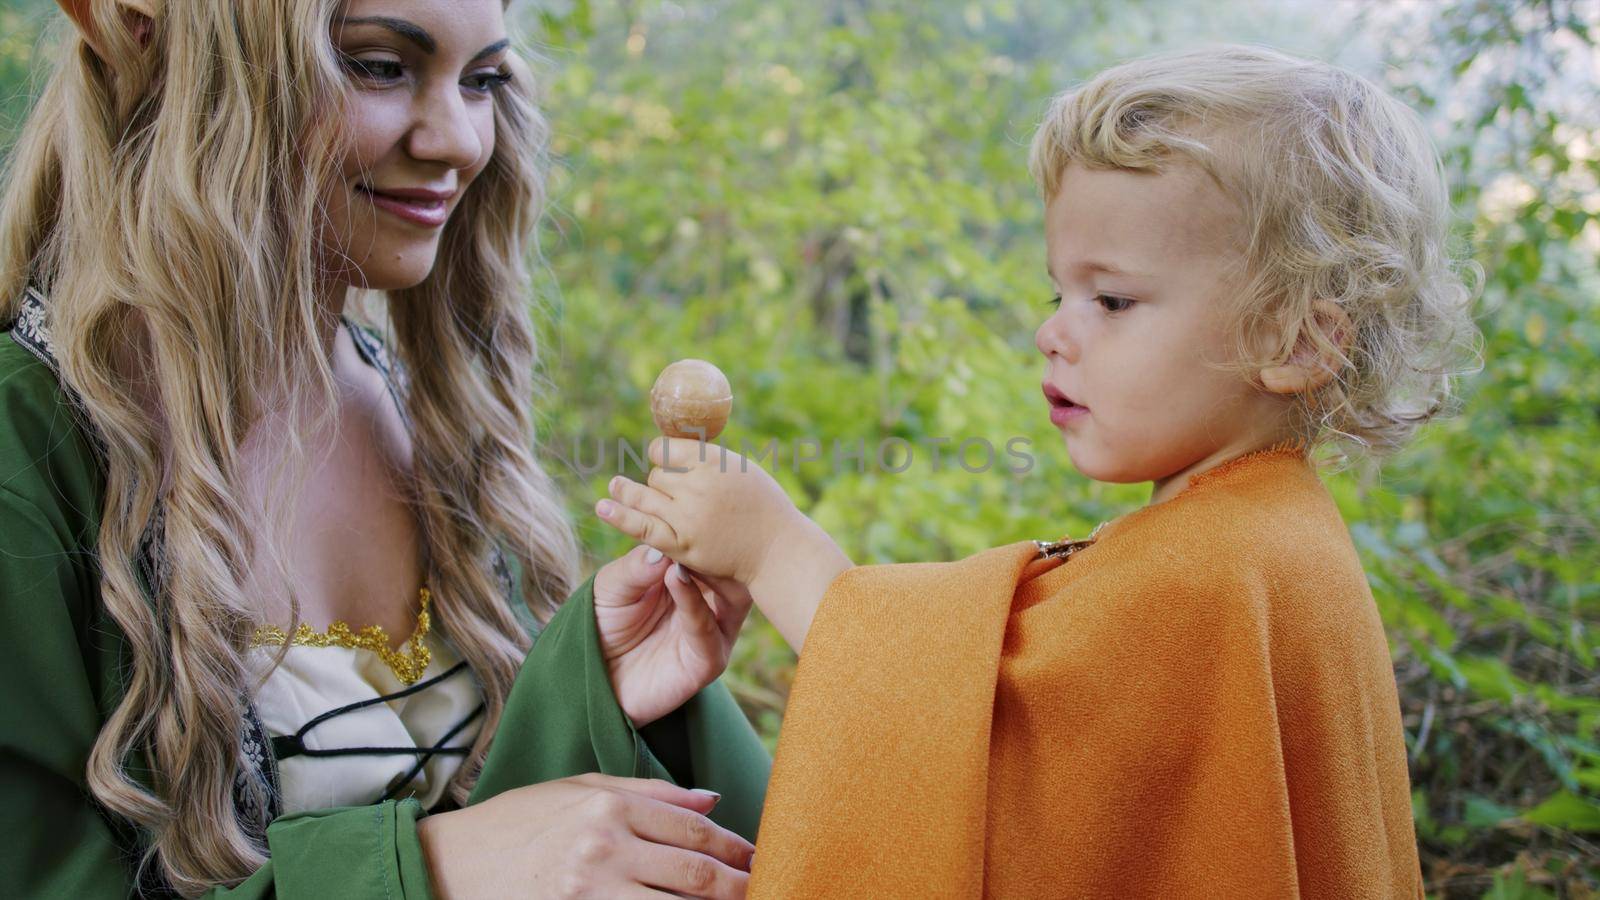 Fairy elf cosplay woman treats little baby boy hobbit with candy in green forest. Halloween concept, fairytale characters, kids. by kristina_kokhanova